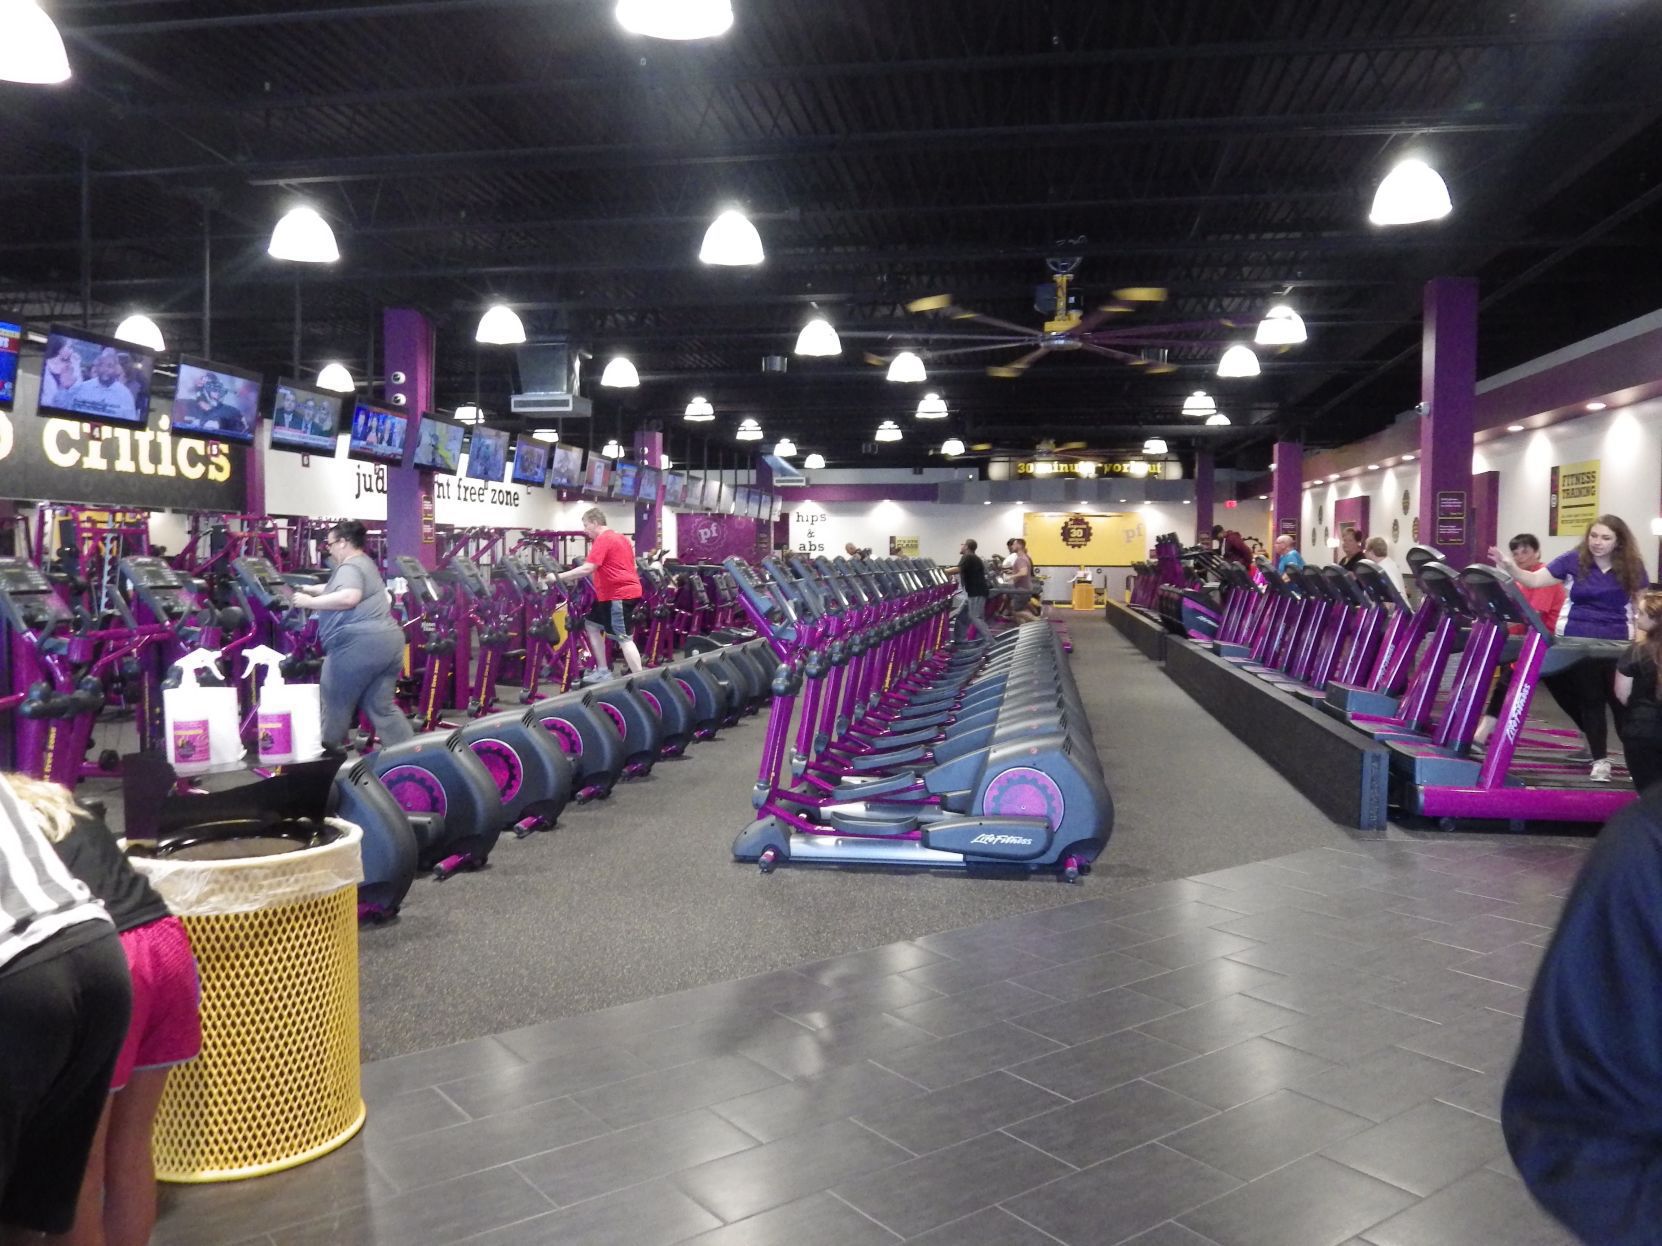 planet fitness clinton township